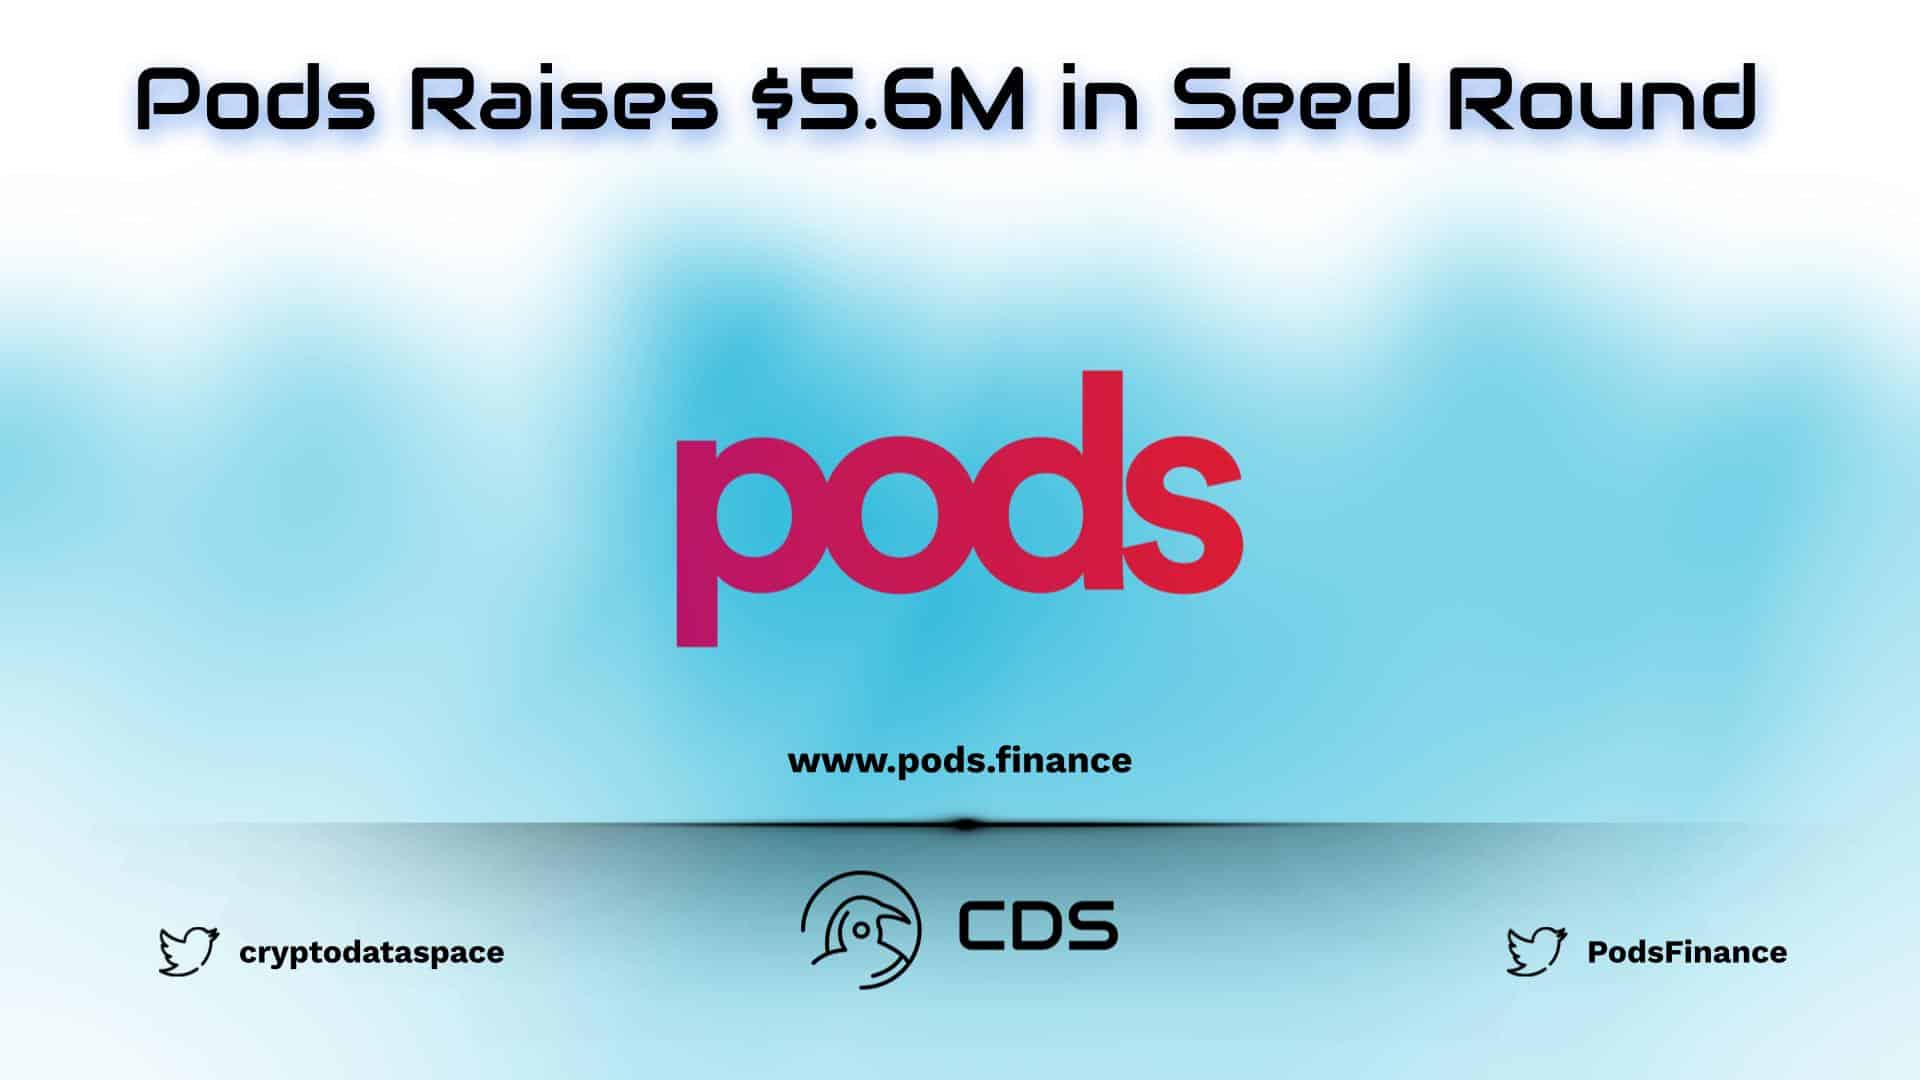 Pods Raises $5.6M in Seed Round